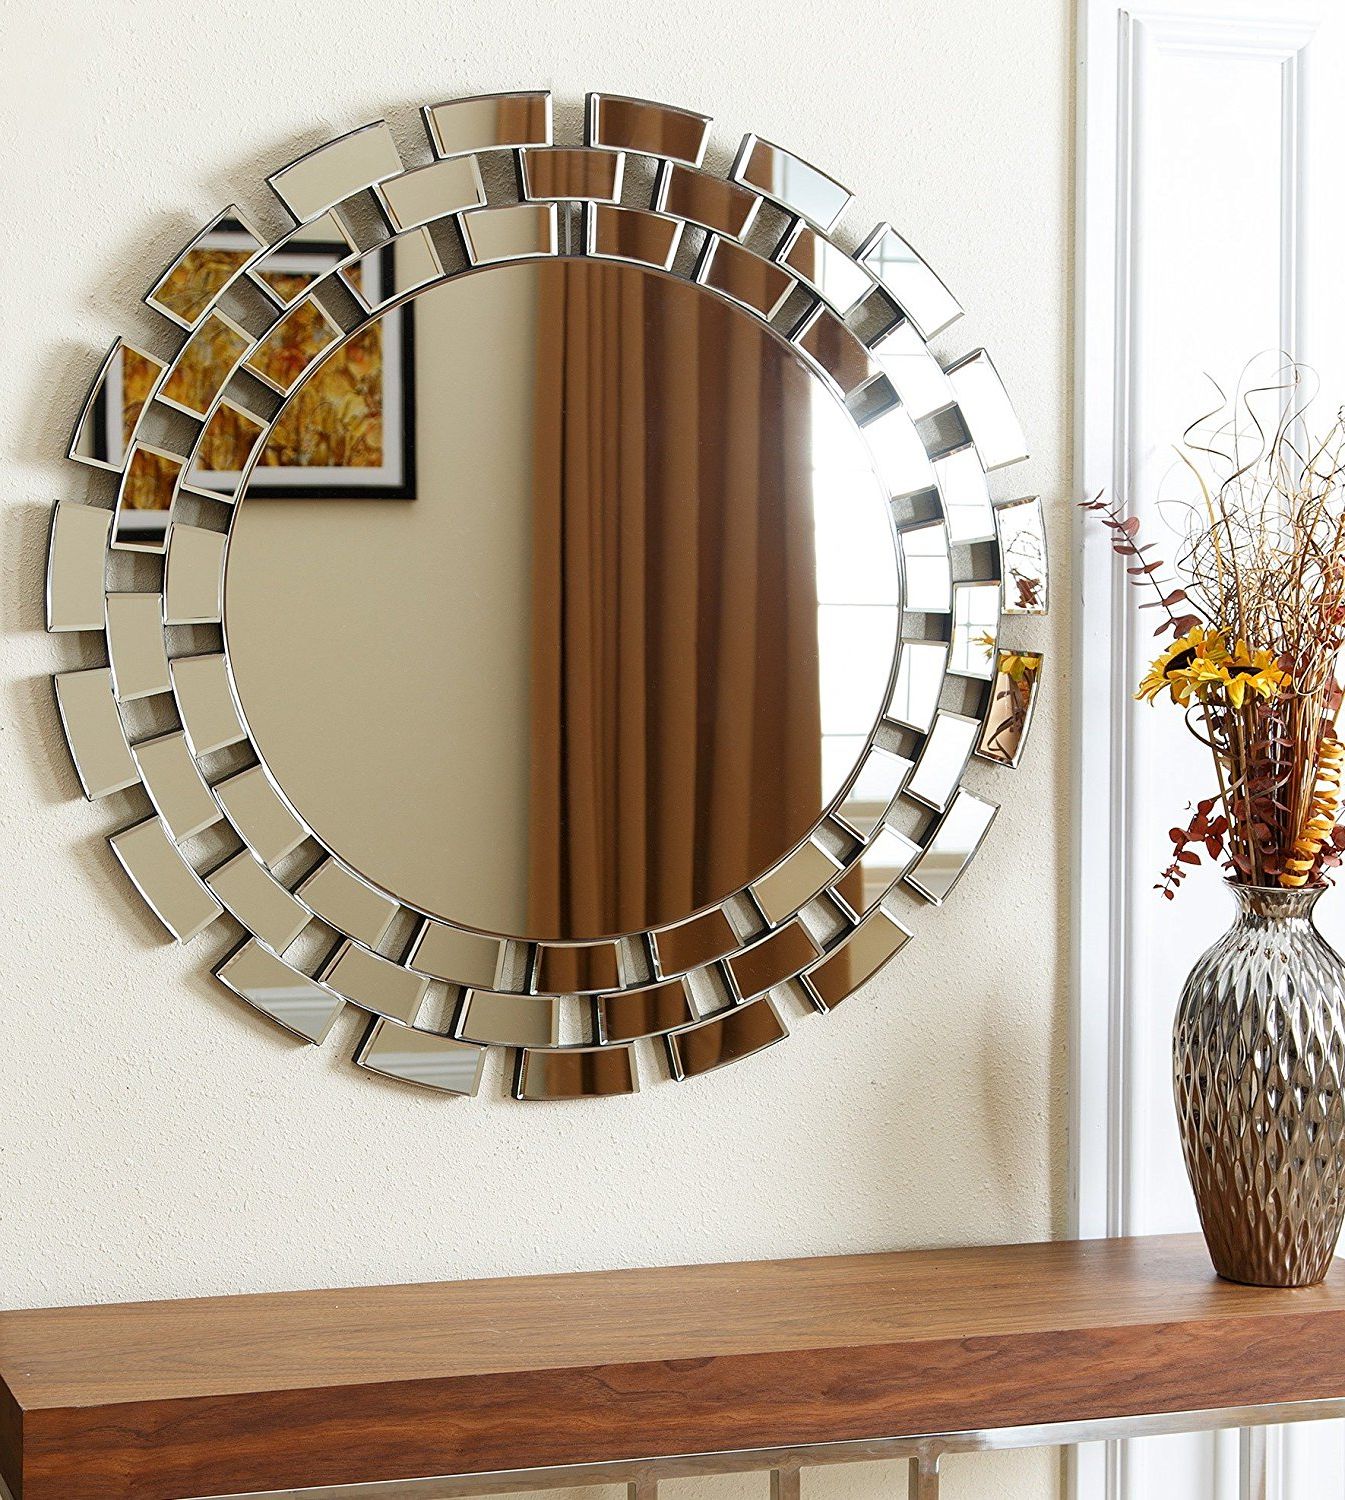 Decorative Round Wall Mirrors Inside Favorite Exciting Large Round Wall Mirror With Fancy Design Bathroom 